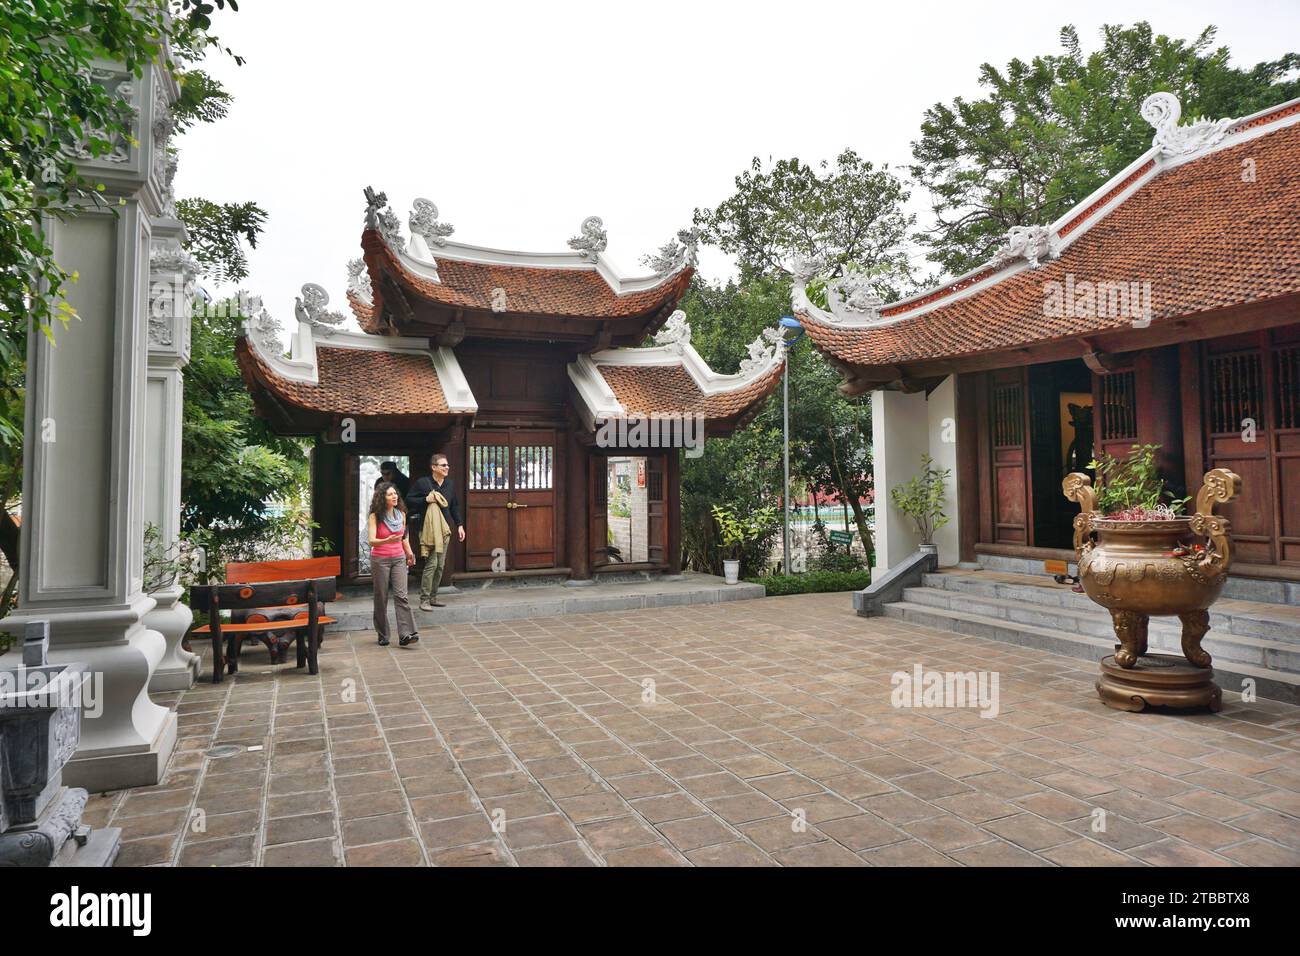 Visitors enter the inner courtyard of a Buddhist temple in Hanoi, Vietnam. The entry gate and temple feature an upswept pagoda-style clay tile roof Stock Photo